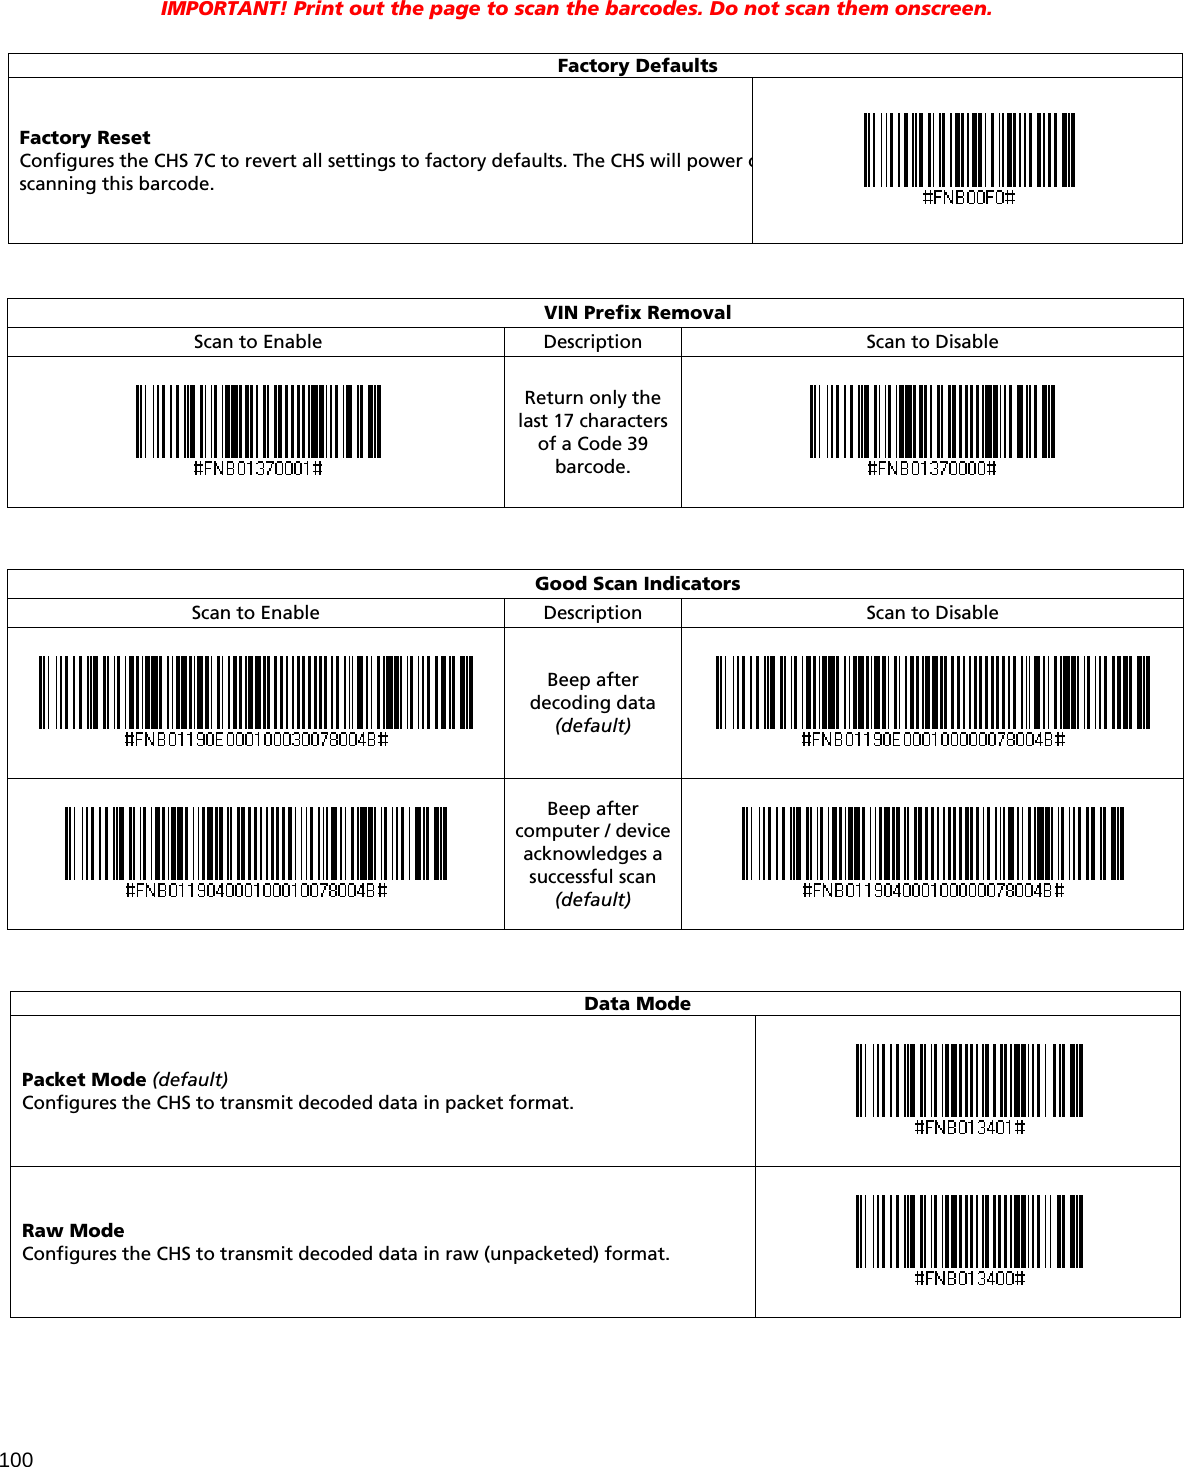 100 IMPORTANT! Print out the page to scan the barcodes. Do not scan them onscreen.   Factory Defaults Factory Reset Configures the CHS 7C to revert all settings to factory defaults. The CHS will power oscanning this barcode.     VIN Prefix Removal Scan to Enable Description  Scan to Disable  Return only the last 17 characters of a Code 39 barcode.     Good Scan Indicators Scan to Enable Description  Scan to Disable  Beep after decoding data (default)    Beep after computer / device acknowledges a successful scan (default)      Data Mode Packet Mode (default) Configures the CHS to transmit decoded data in packet format.  Raw Mode Configures the CHS to transmit decoded data in raw (unpacketed) format.  